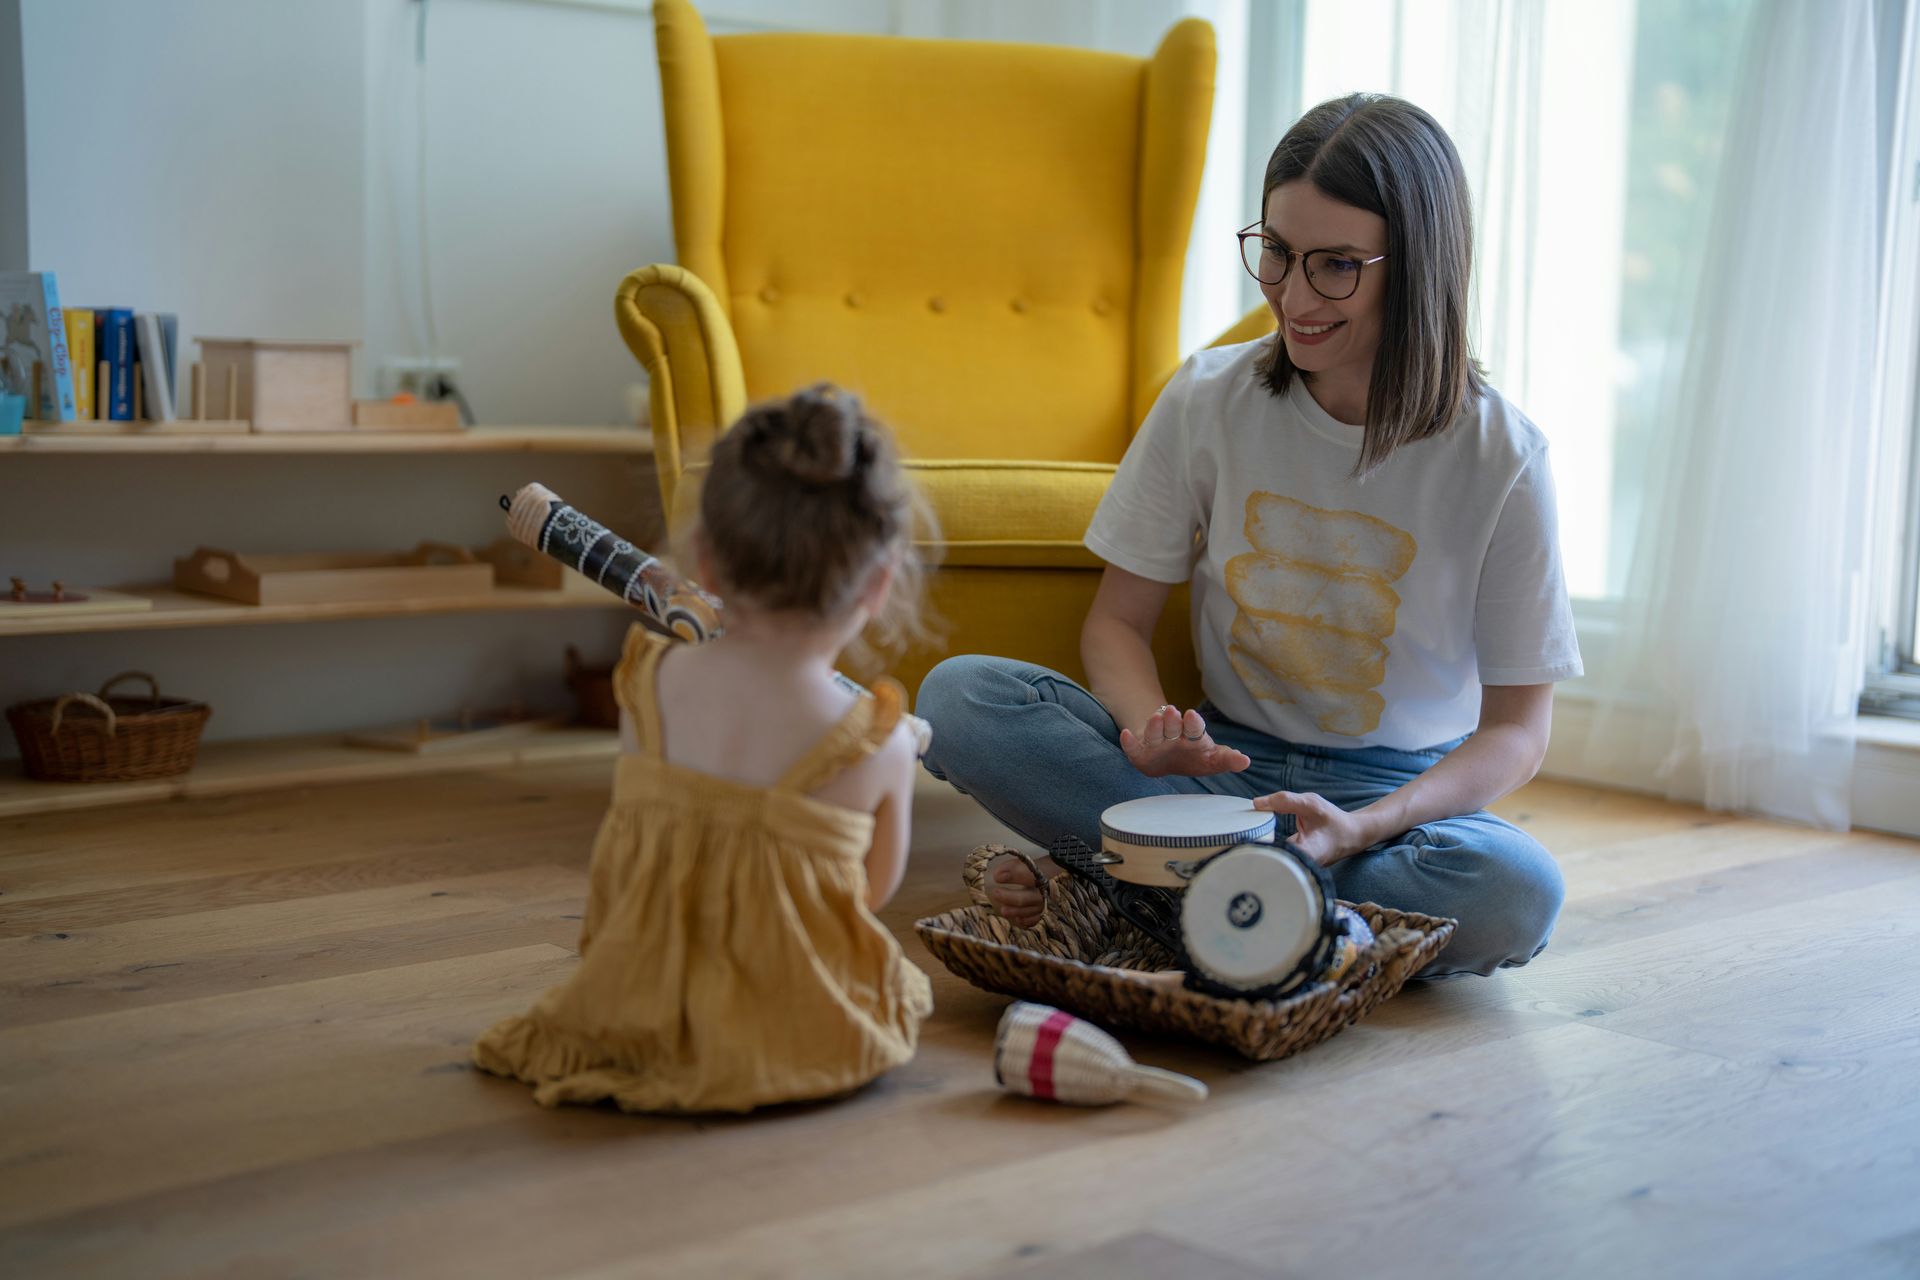 A woman is sitting on the floor playing drums with a little girl.